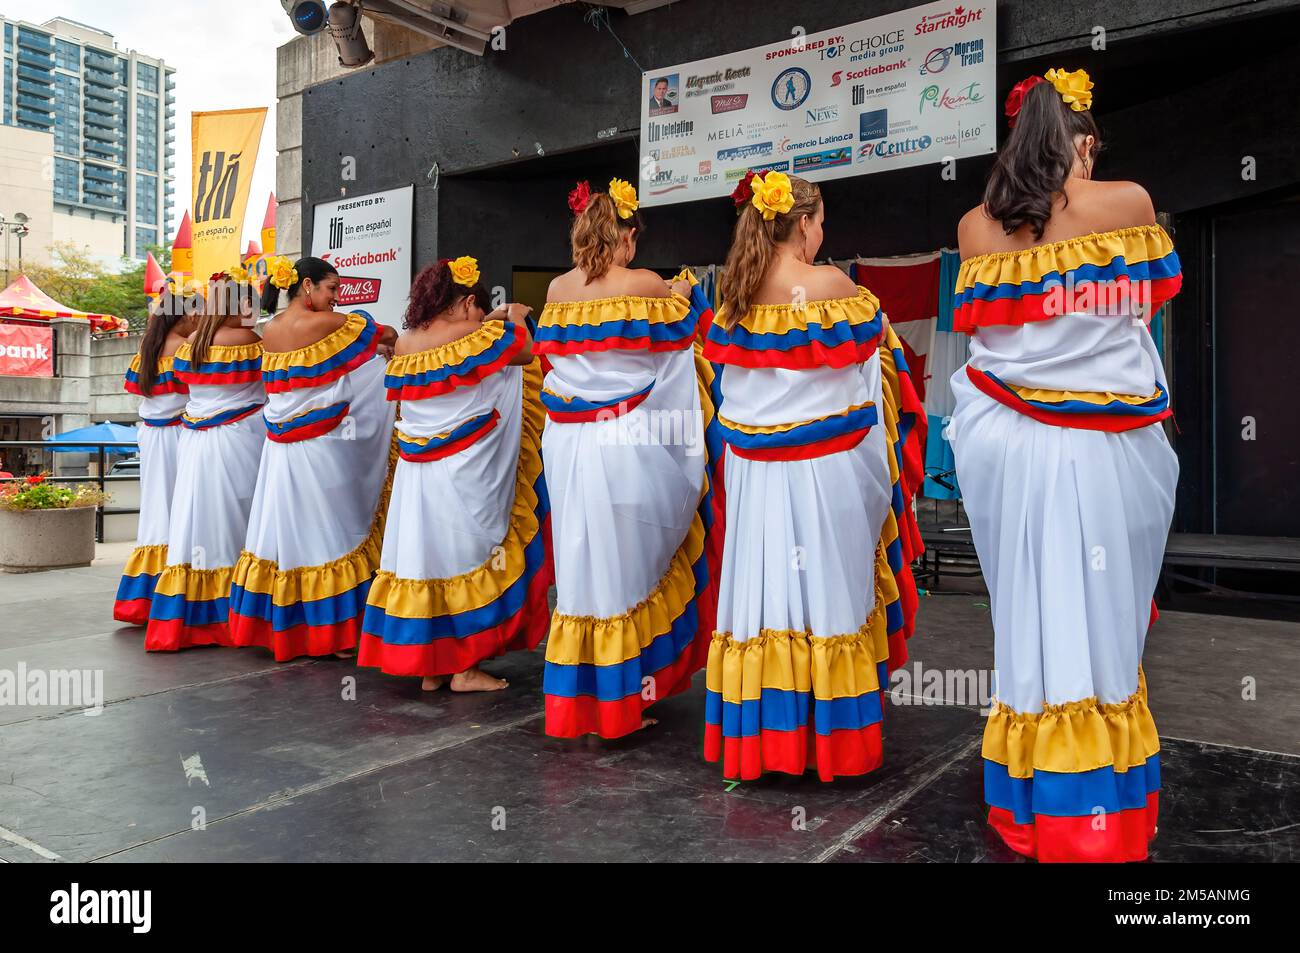 A group of Colombian women wearing traditional clothes dance in the stage. The annual event is held in Mel Lastman square. Stock Photo